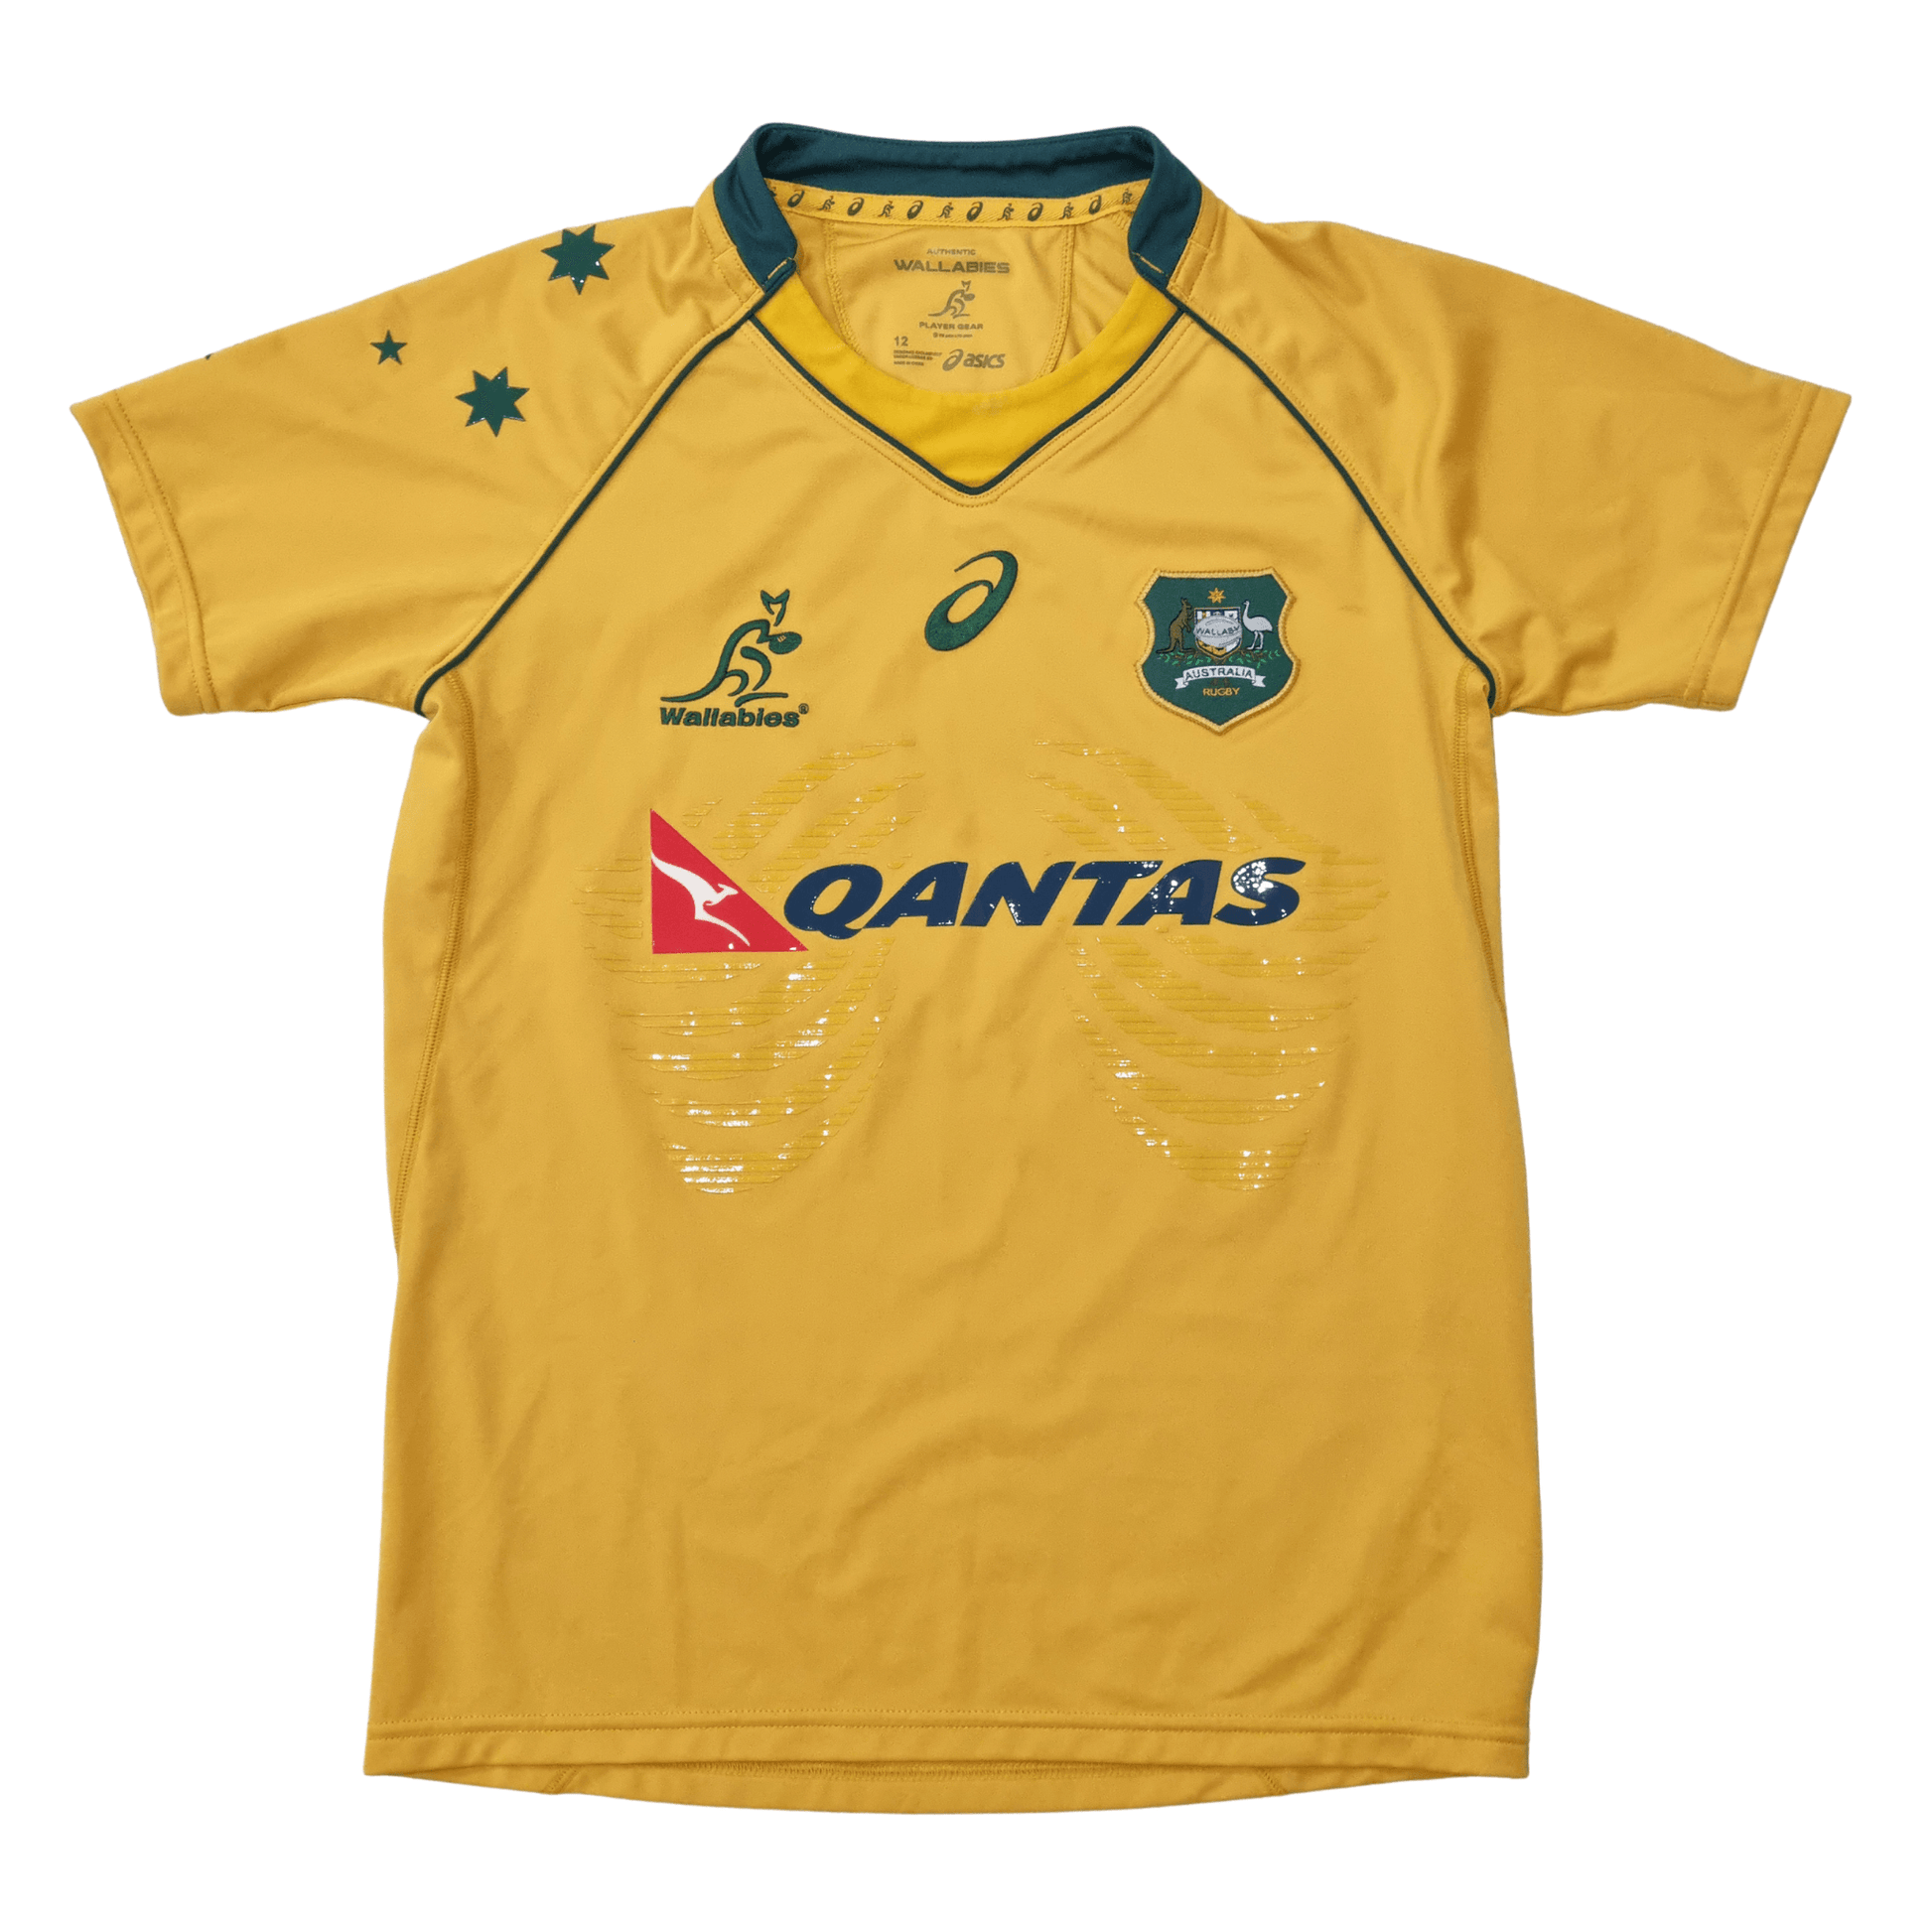 Australia 2017 Home Jersey - front